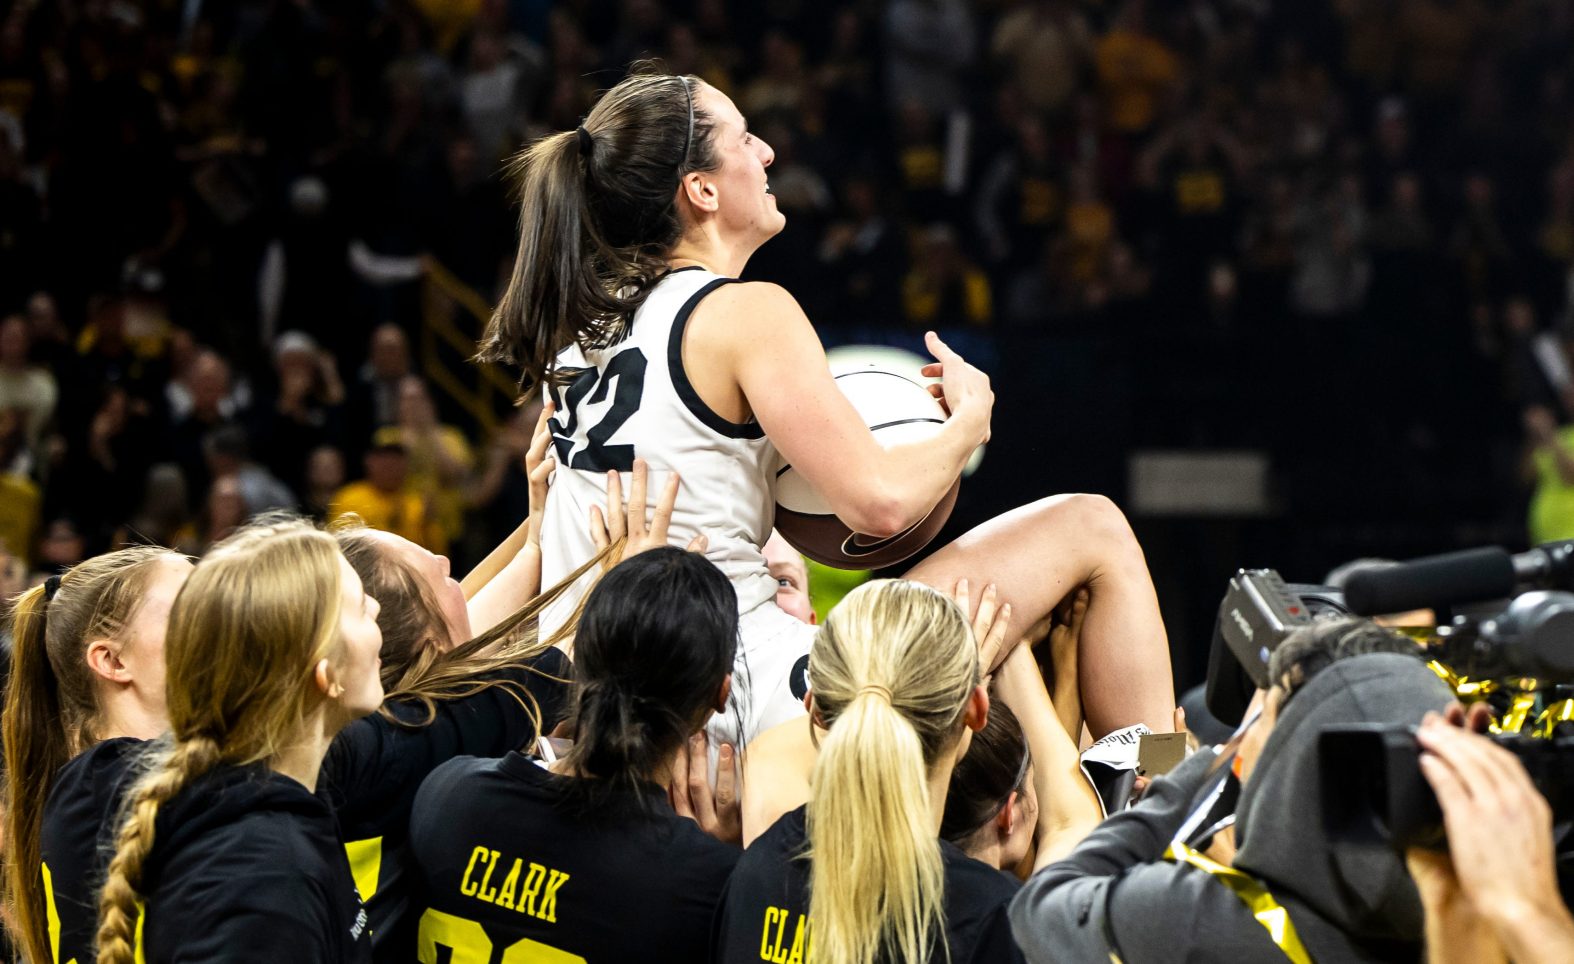 Miller & Williams: Caitlin Clark is the GOAT and the future of women’s sports